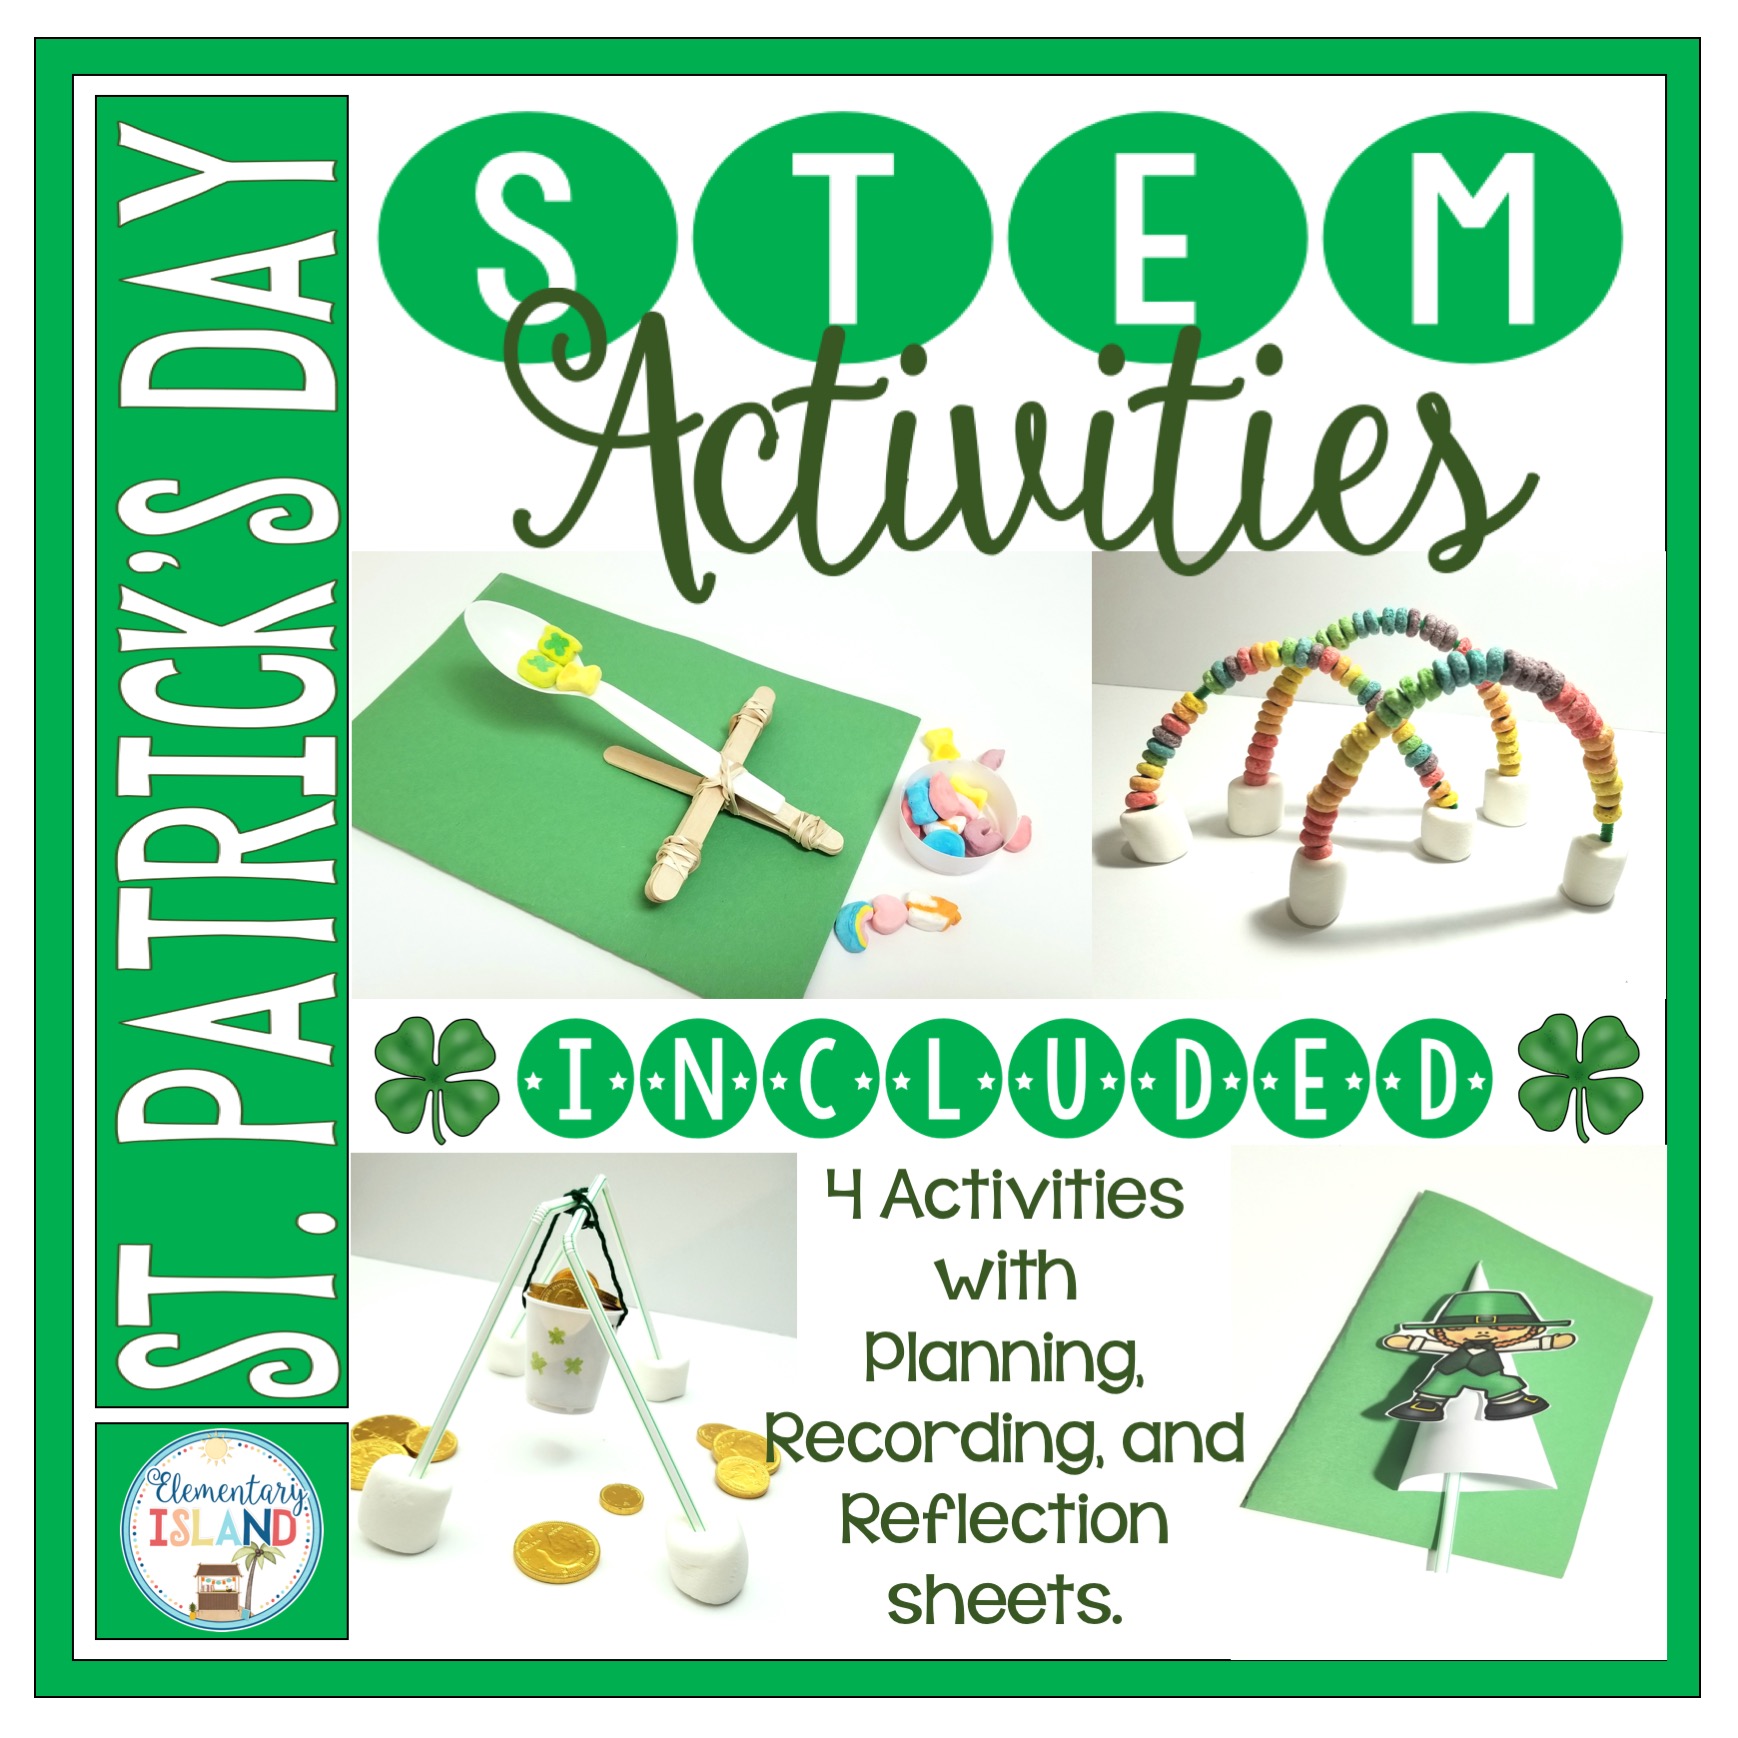 Image of the Product Cover for the St. Patrick's Day STEM challenges